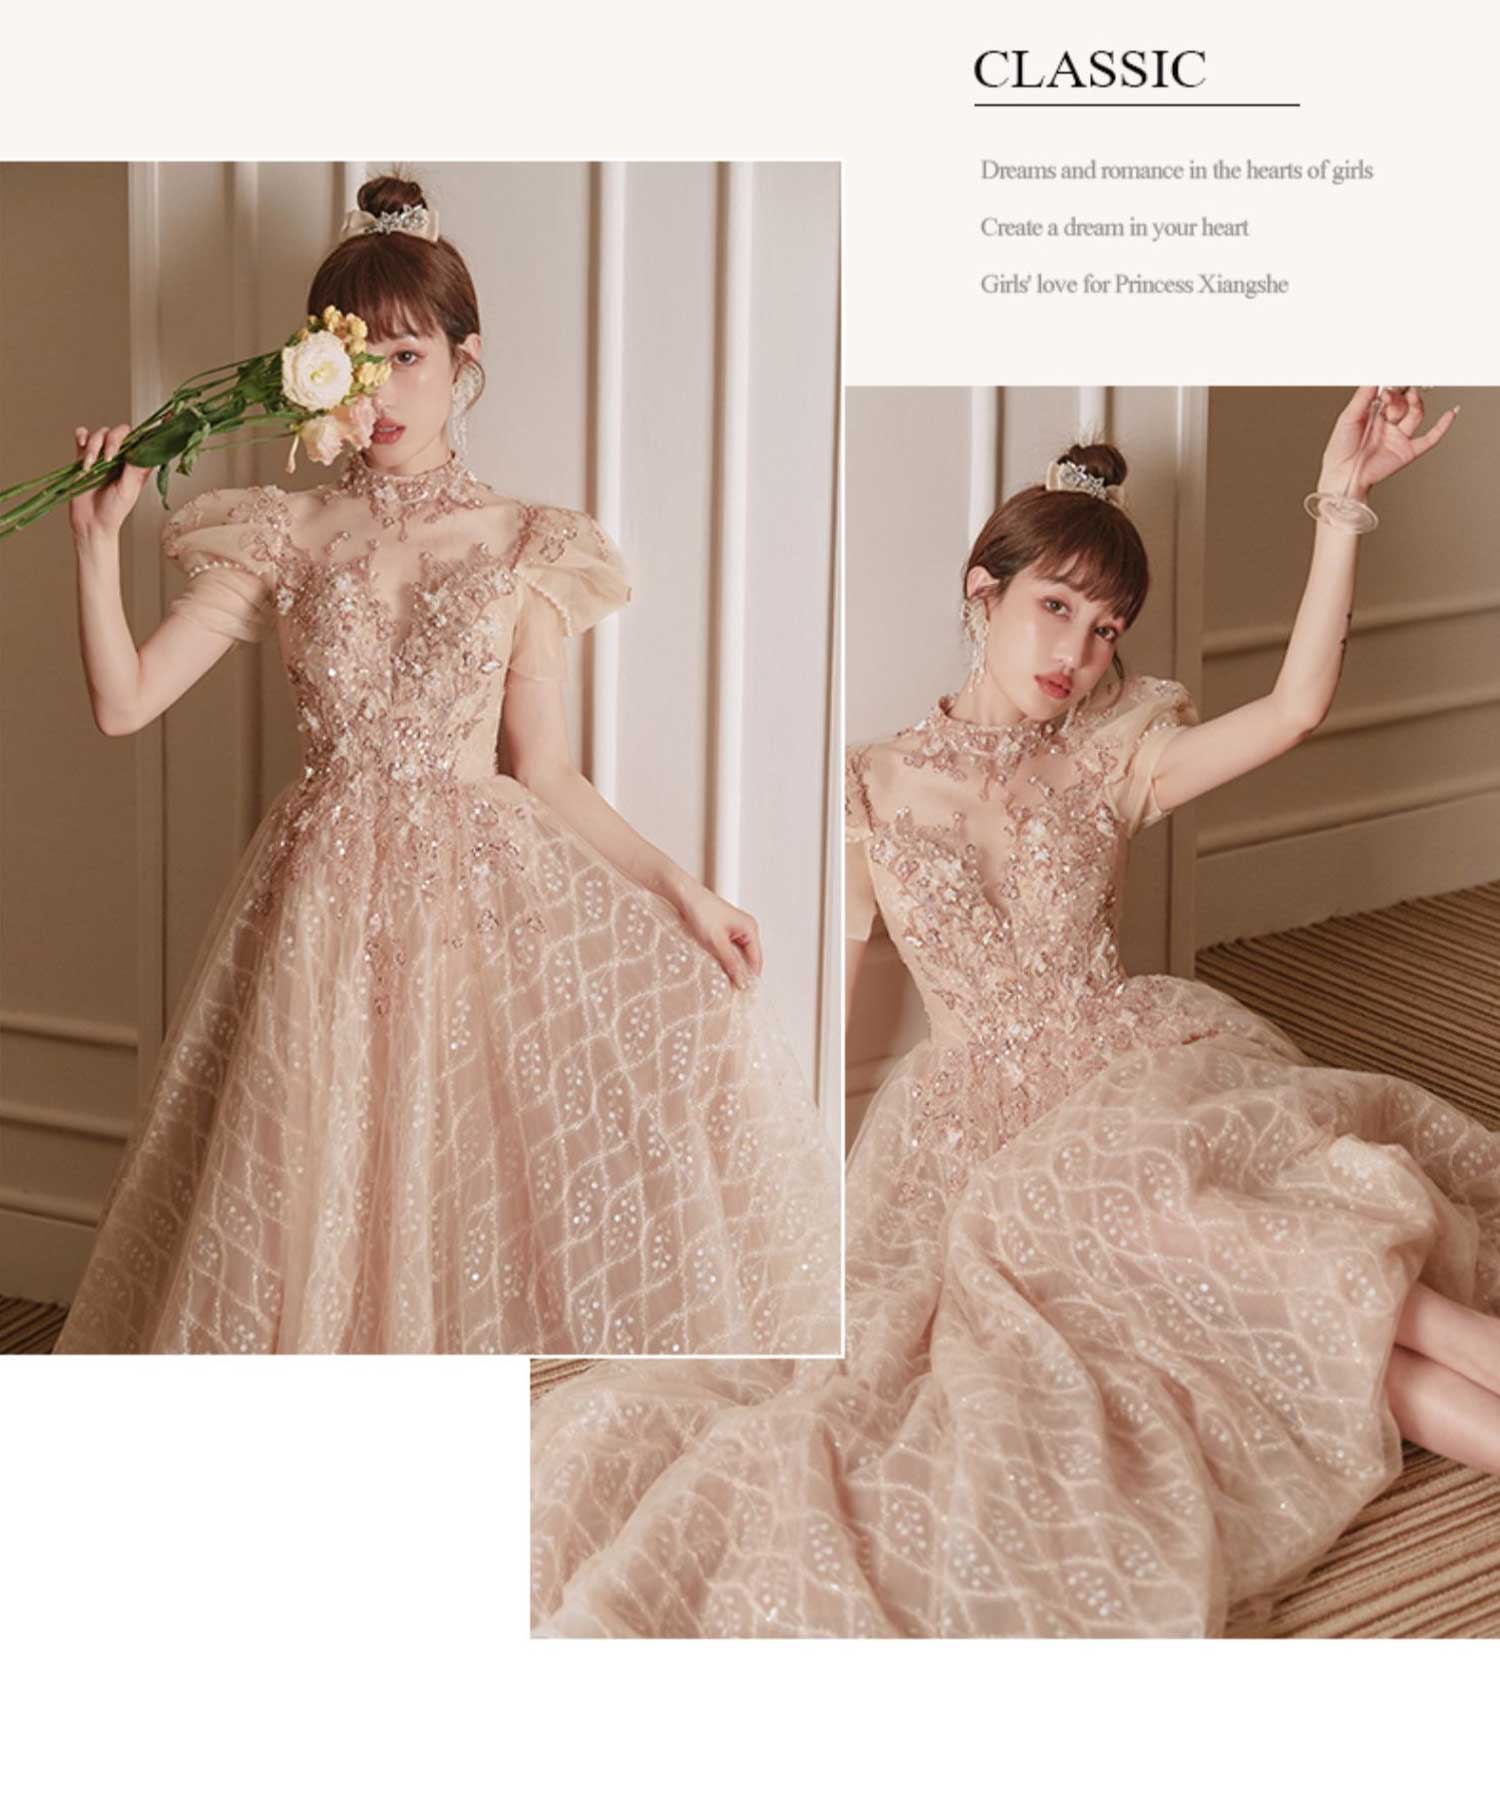 Luxury-Vintage-Cocktail-Party-Prom-Dress-Ball-Gown-Formal-Attire10